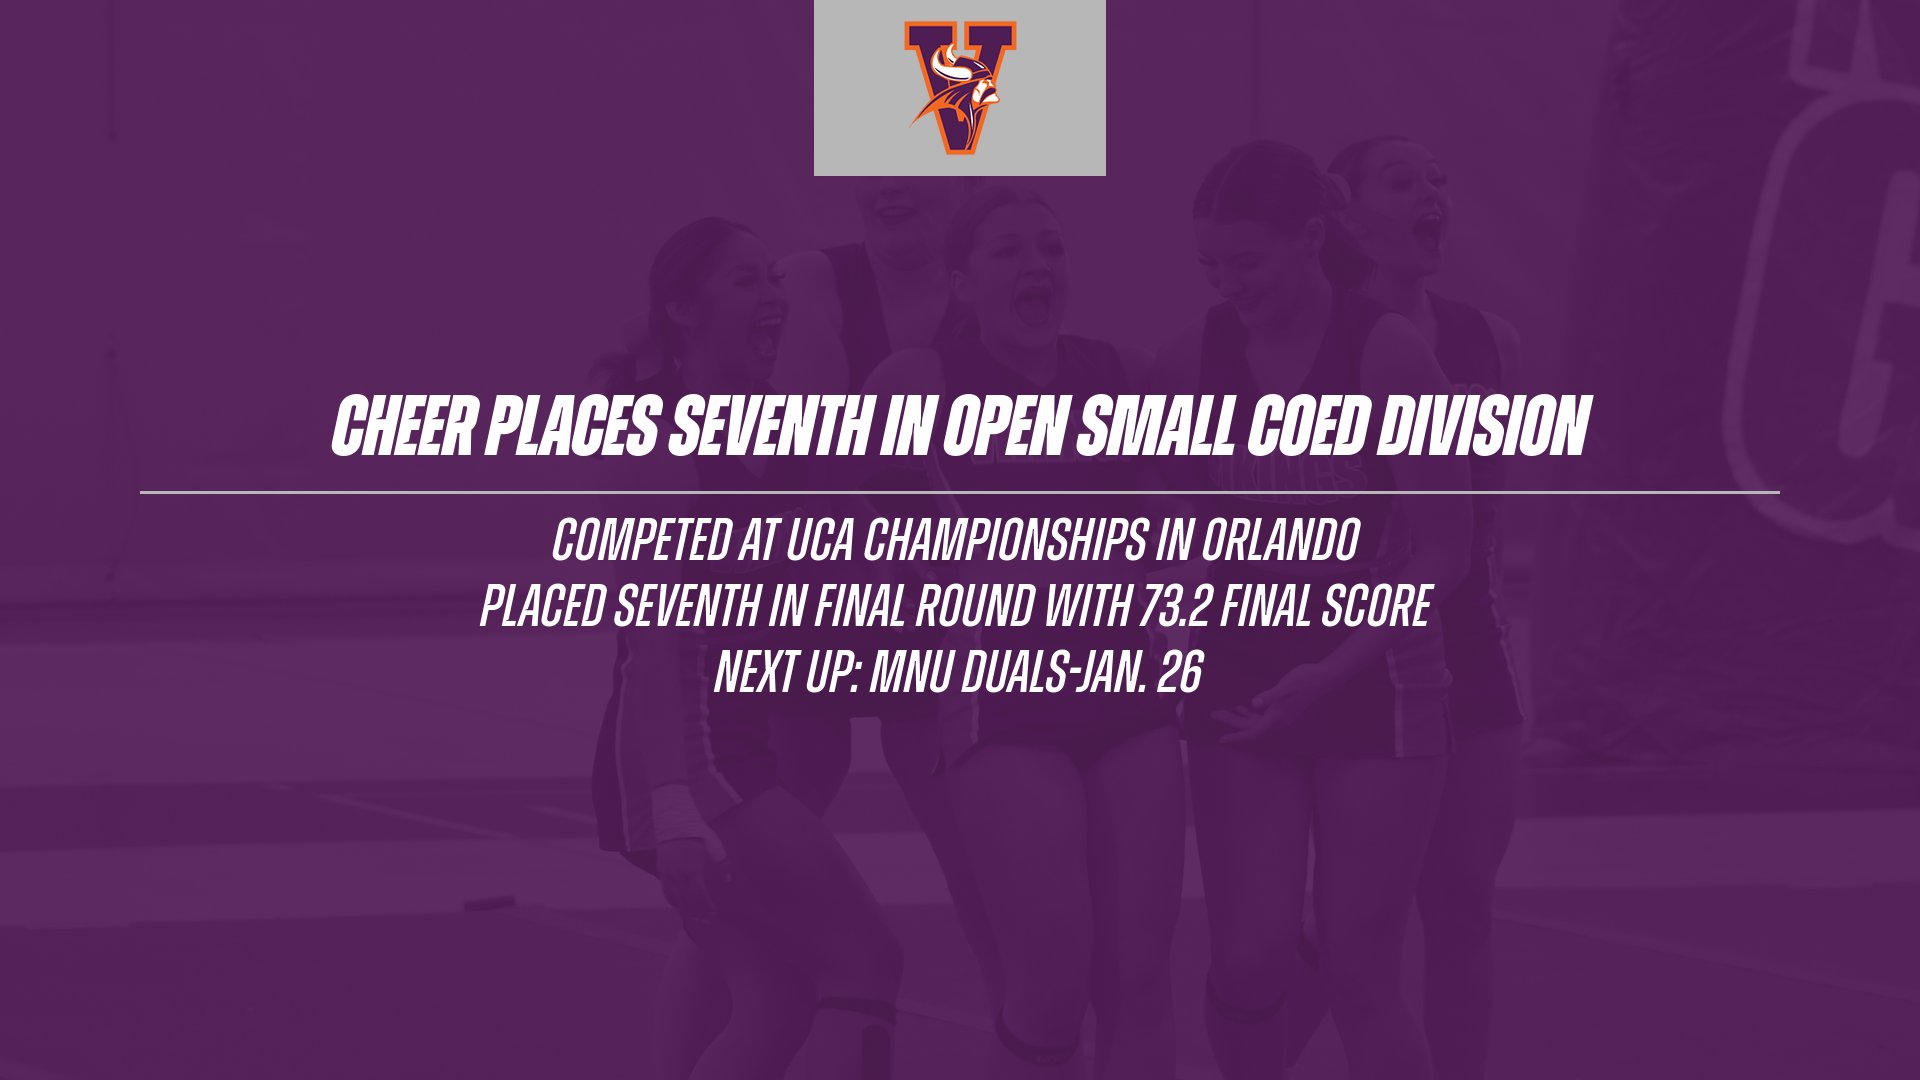 Cheer Places Seventh in Open Small Coed Division at UCA Championships